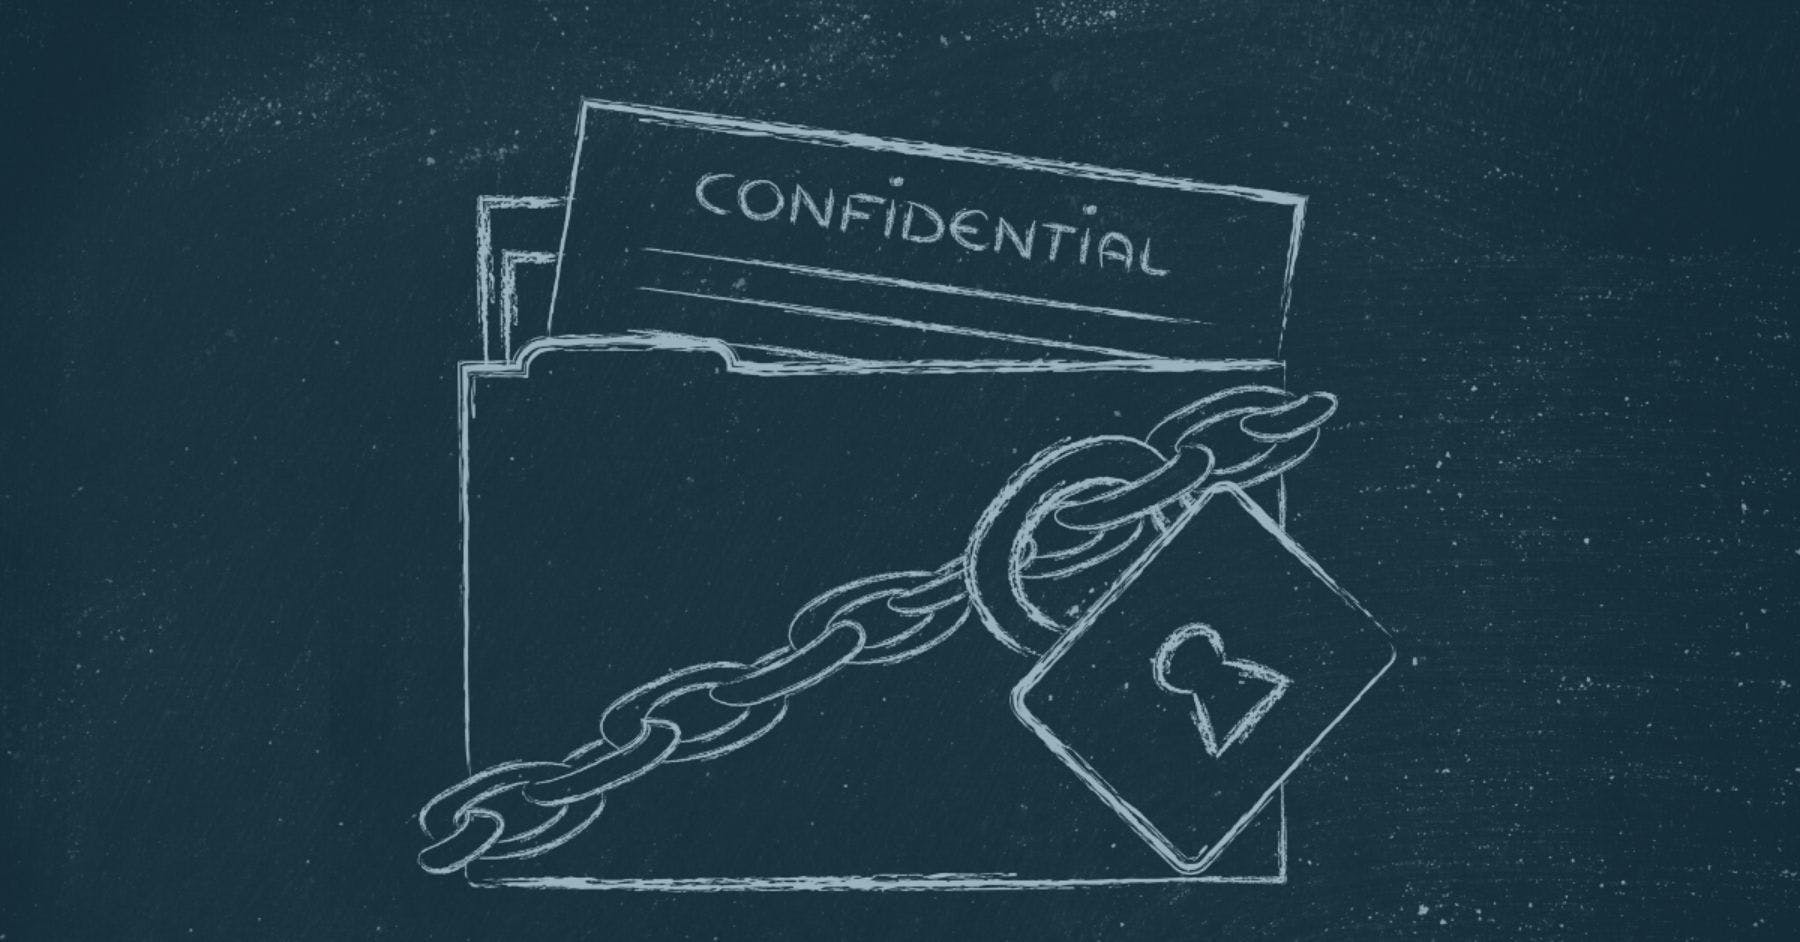 sketch of a file that says confidential with a chain and lock over it